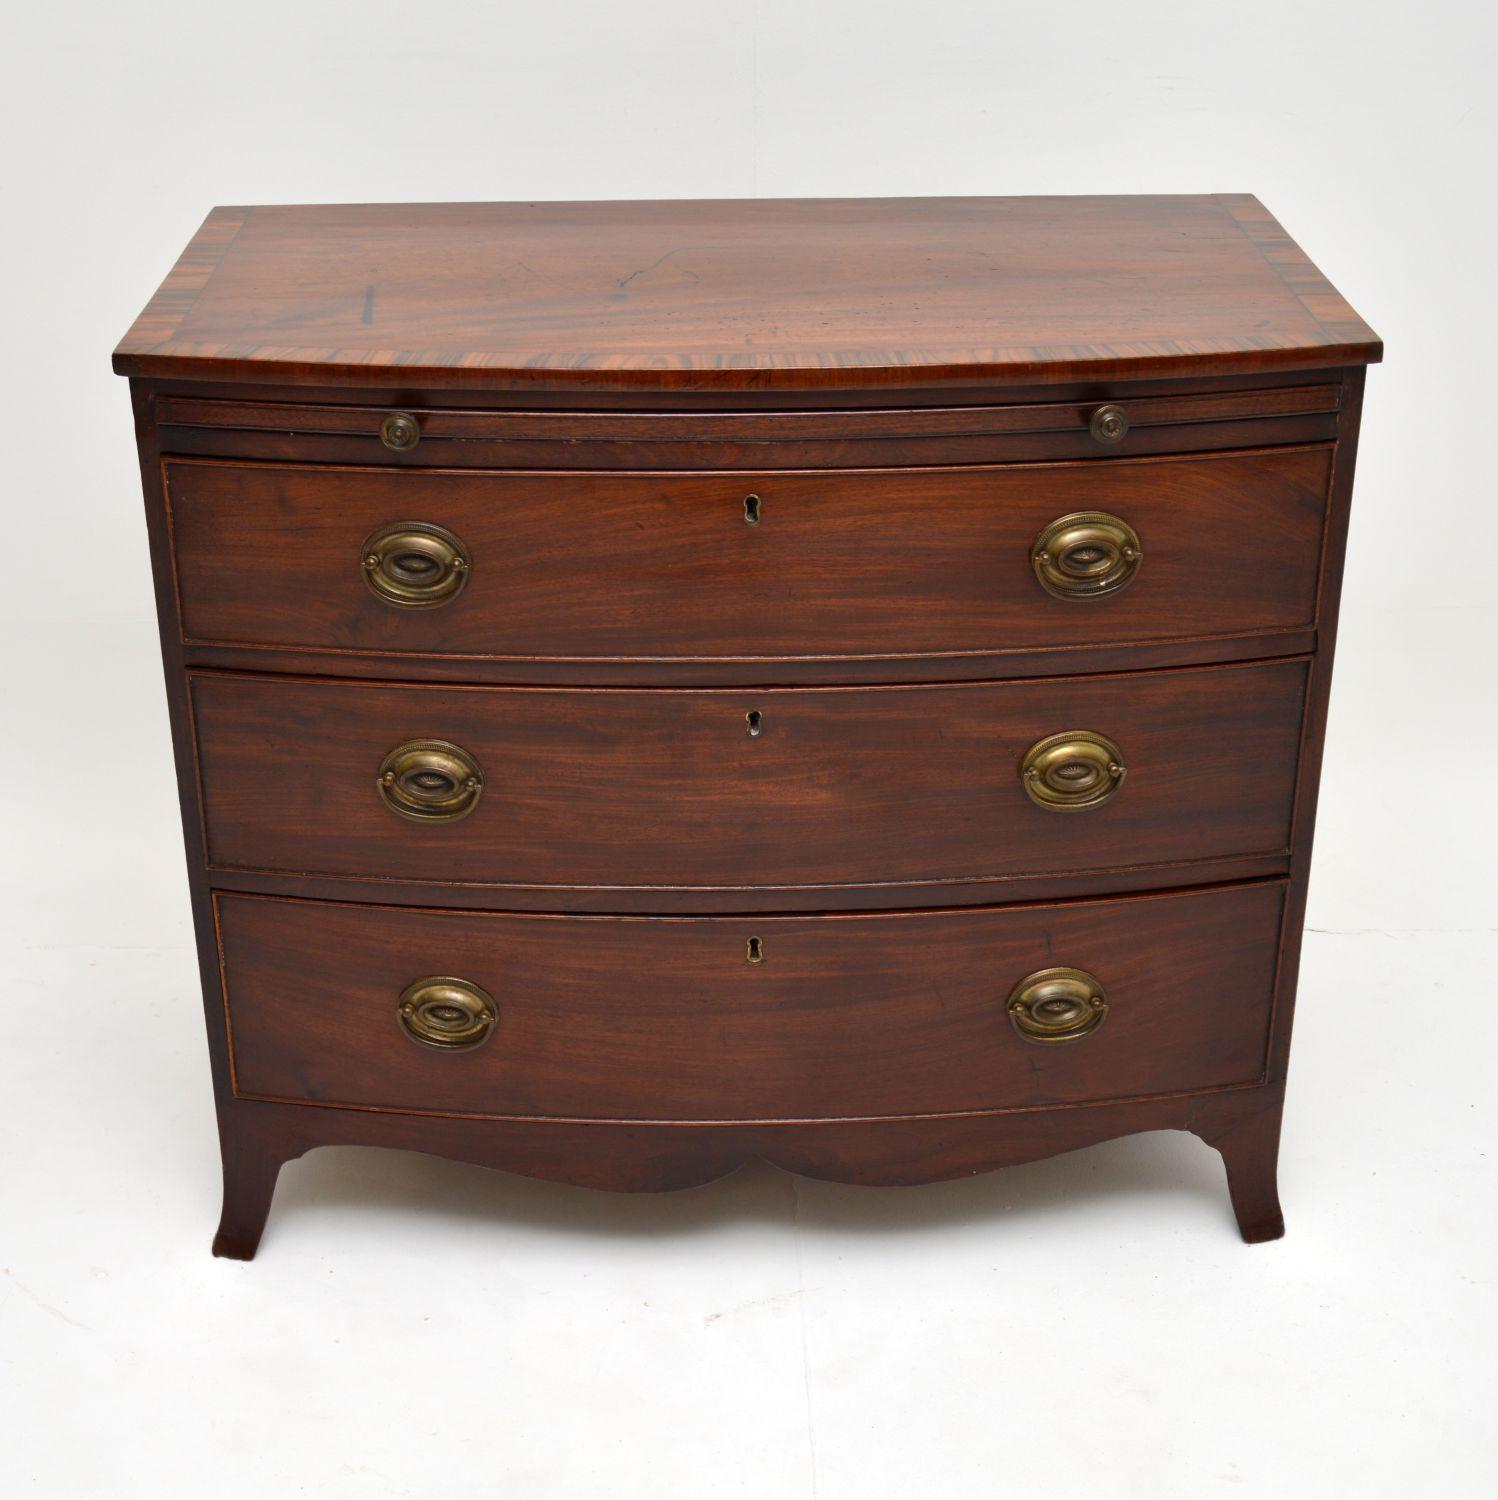 An excellent antique George III period bow front chest of drawers in mahogany. This was made in England, it dates from around the 1790-1810 period.

It is of fine quality and has a lovely design, it sits on splayed bracket feet and has wonderful